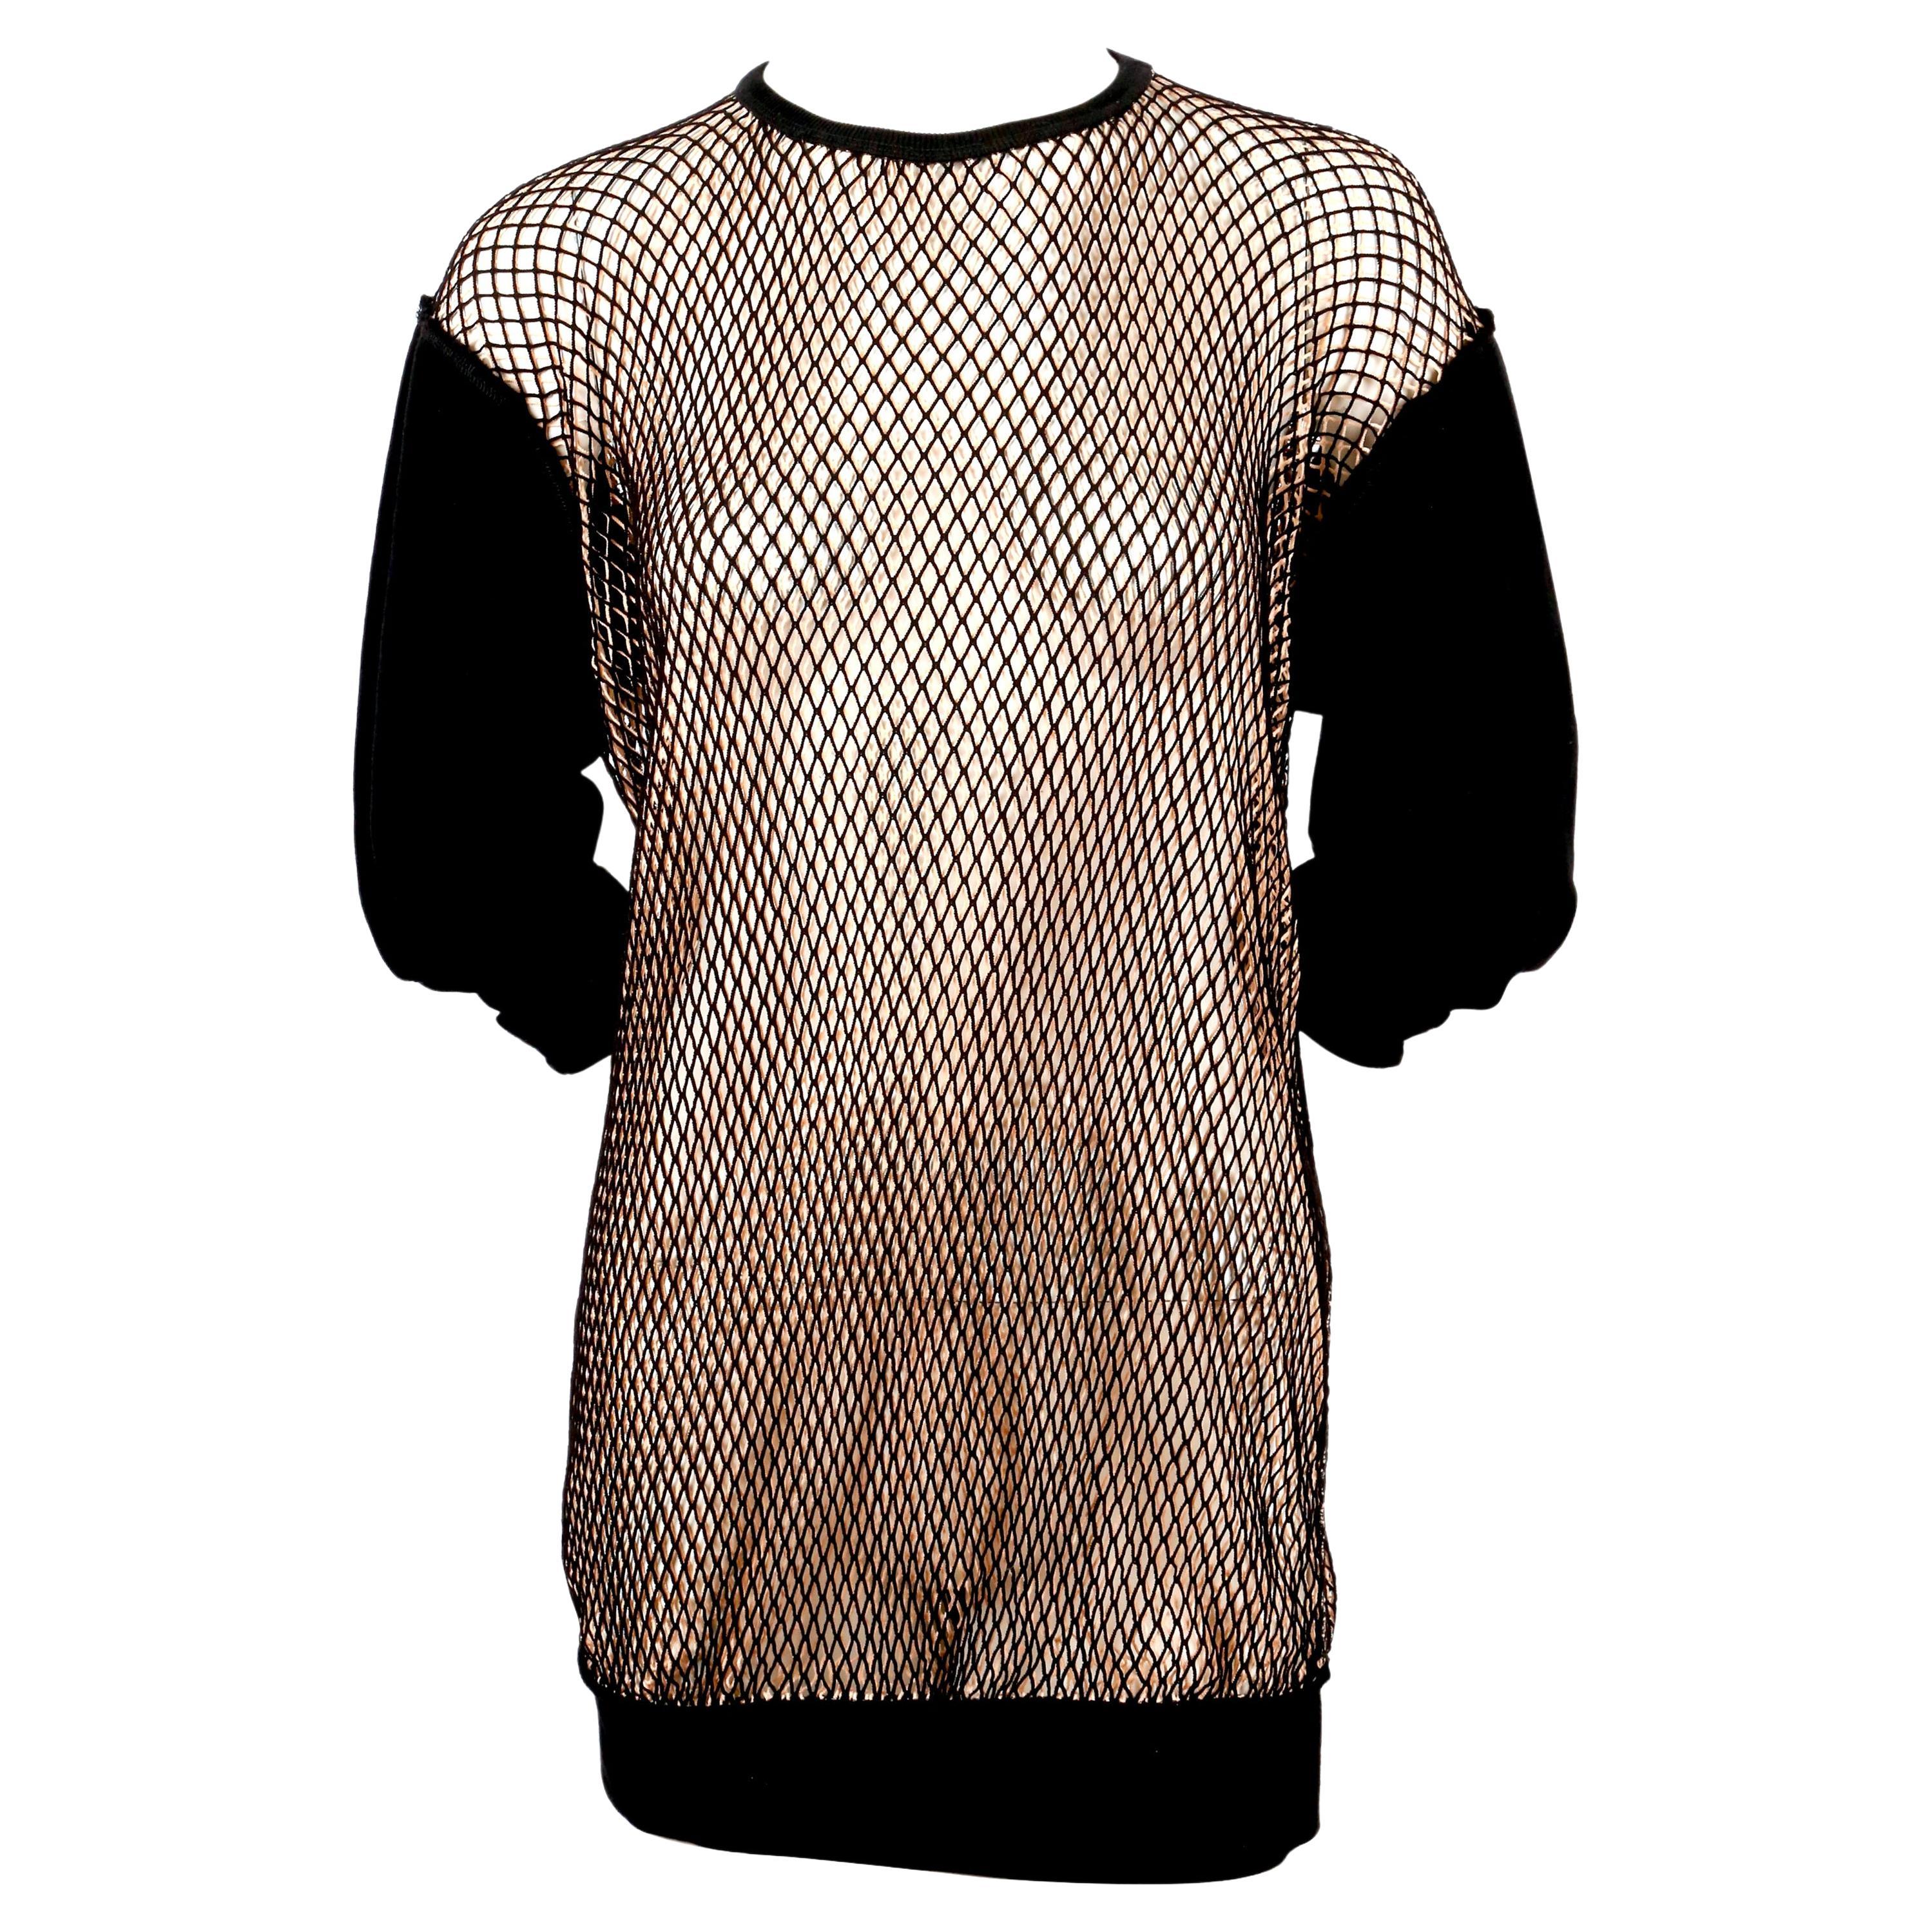 2013 JEAN PAUL GAULTIER double layered fishnet RUNWAY tunic For Sale